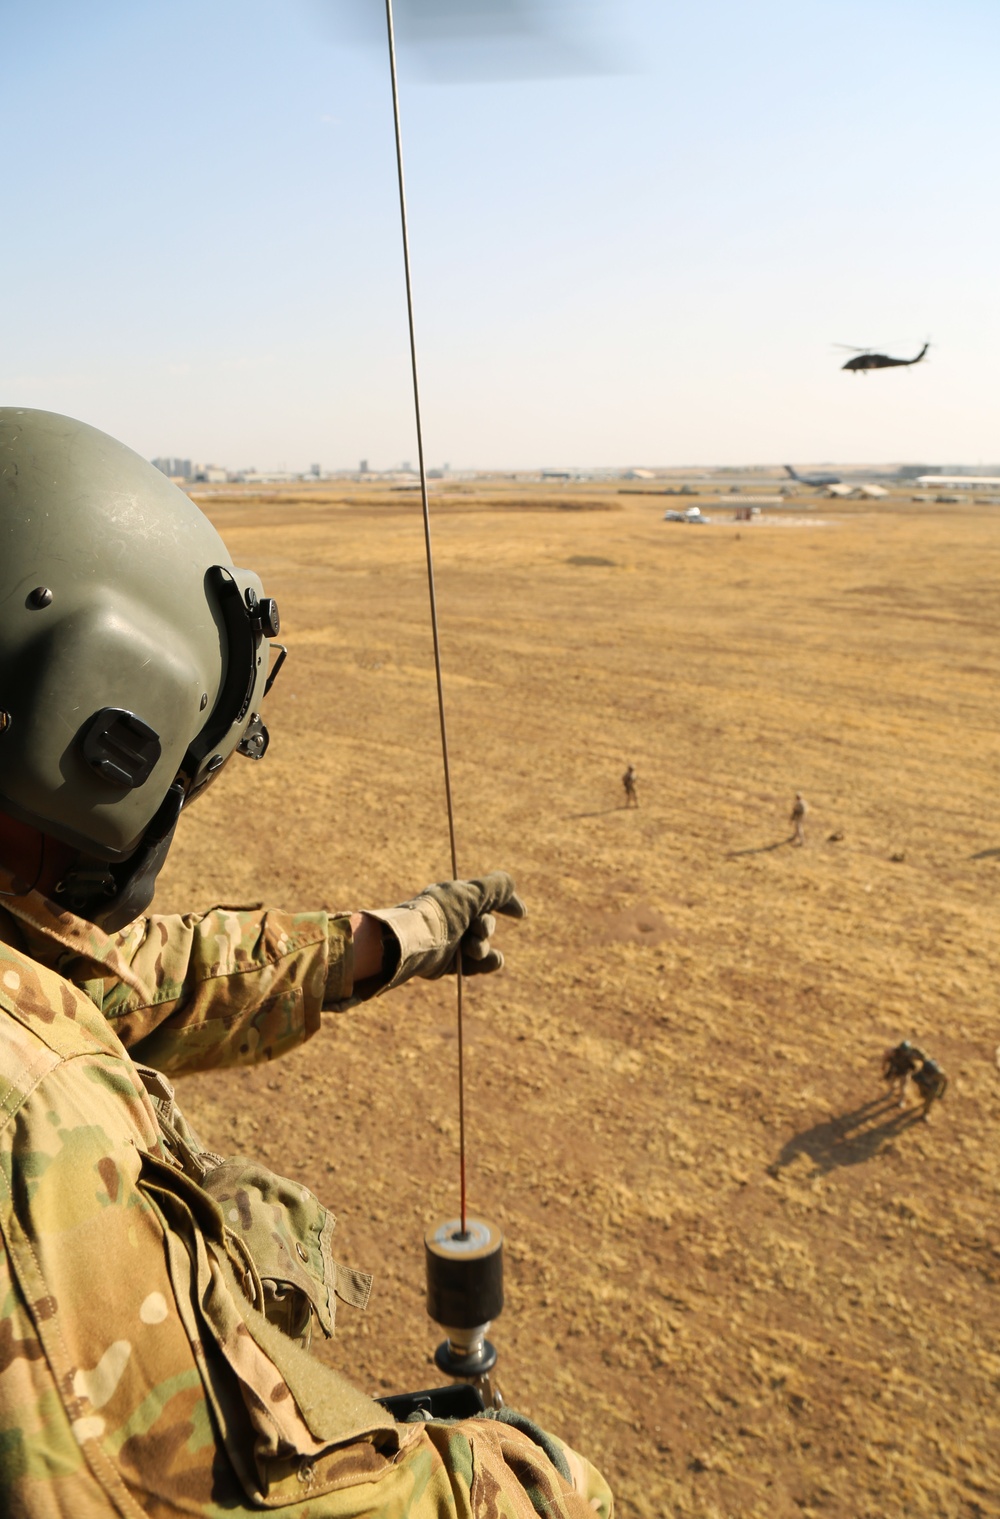 Coalition soldiers conduct medevac training